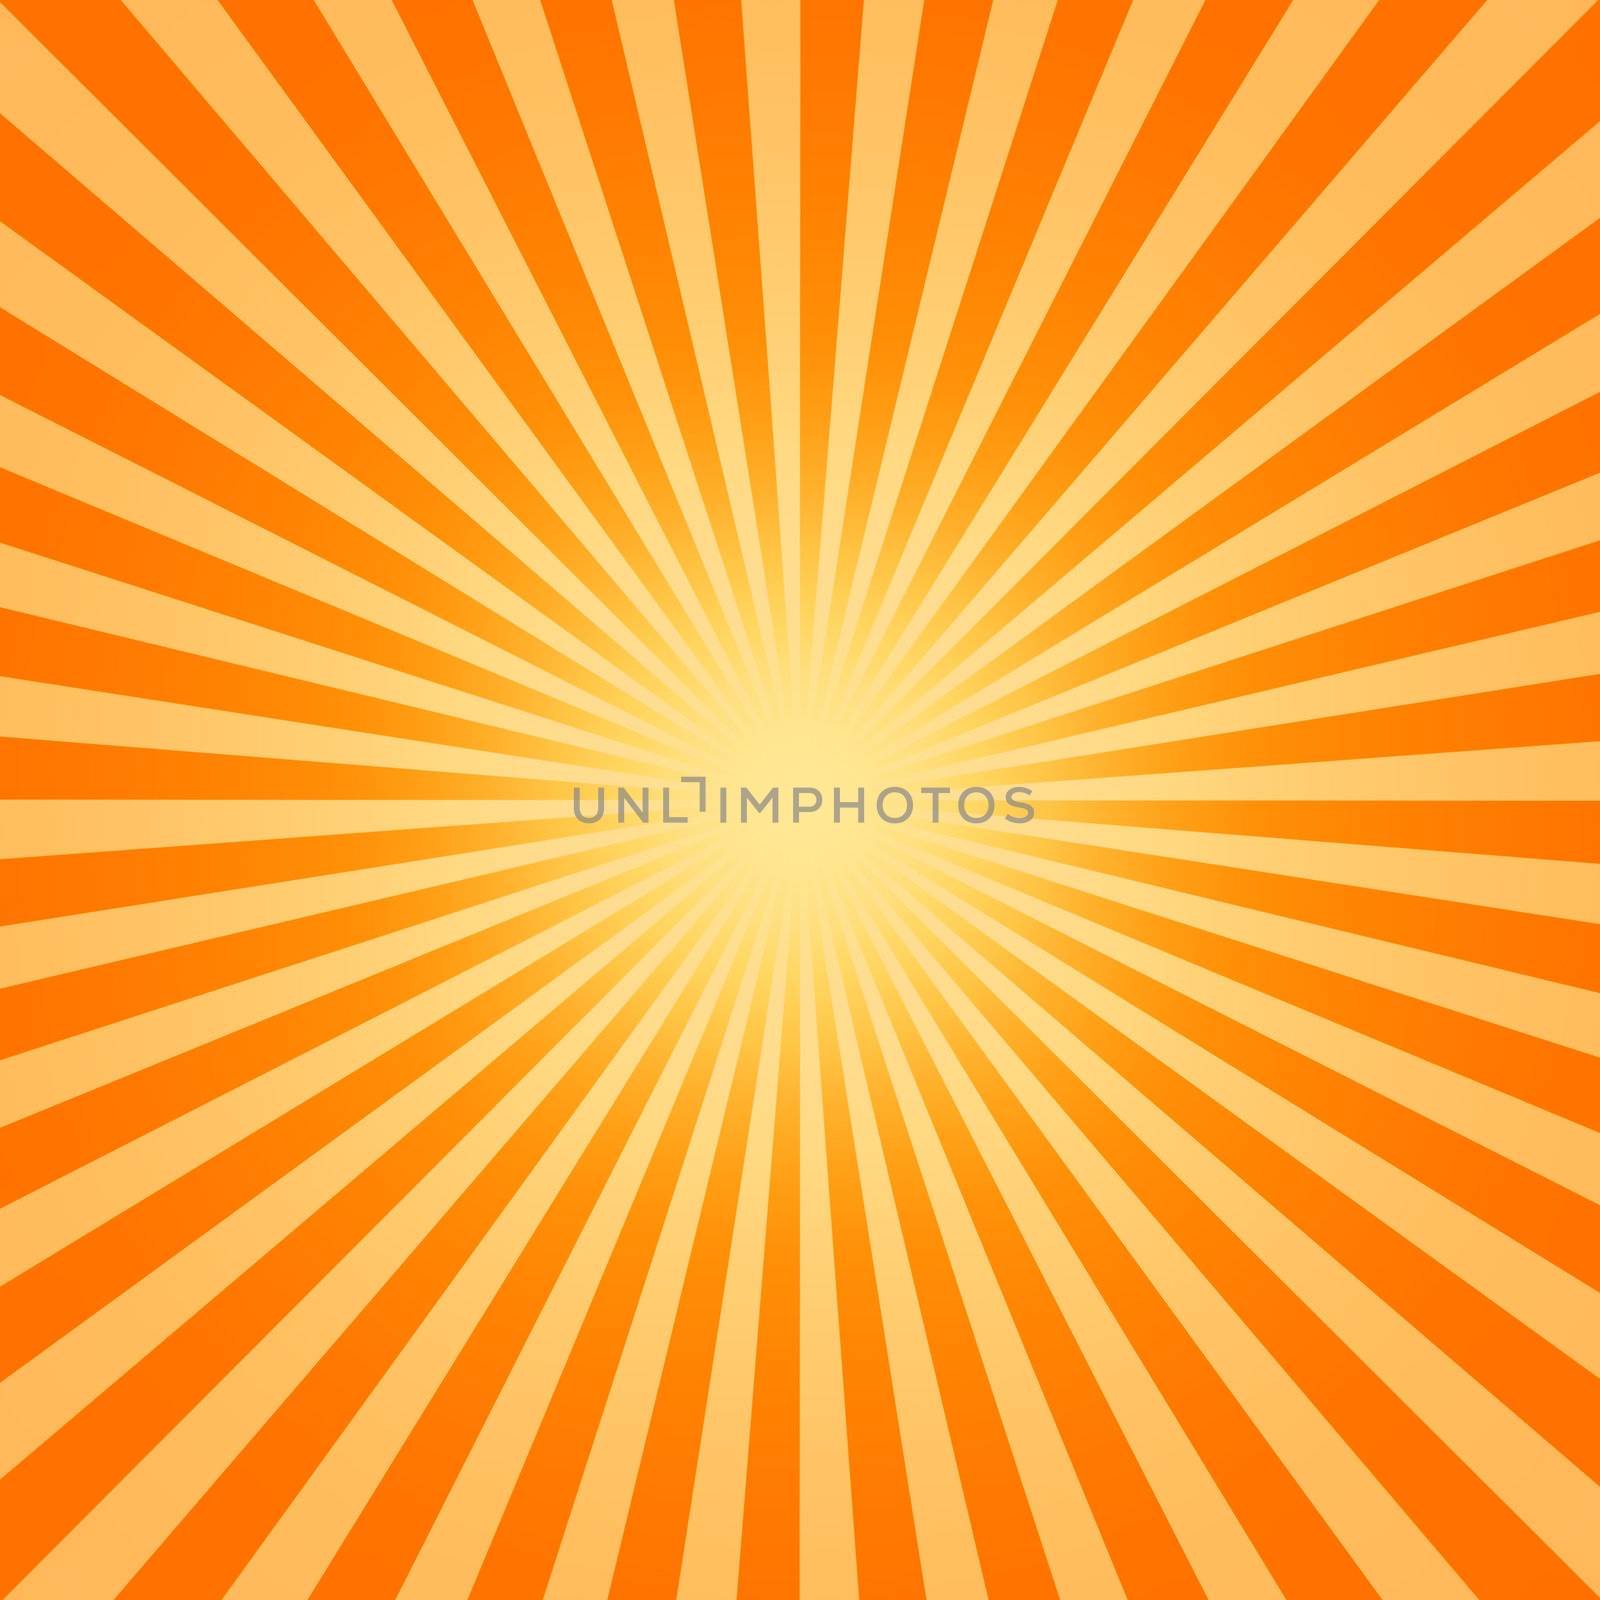 An image of a hot sun background